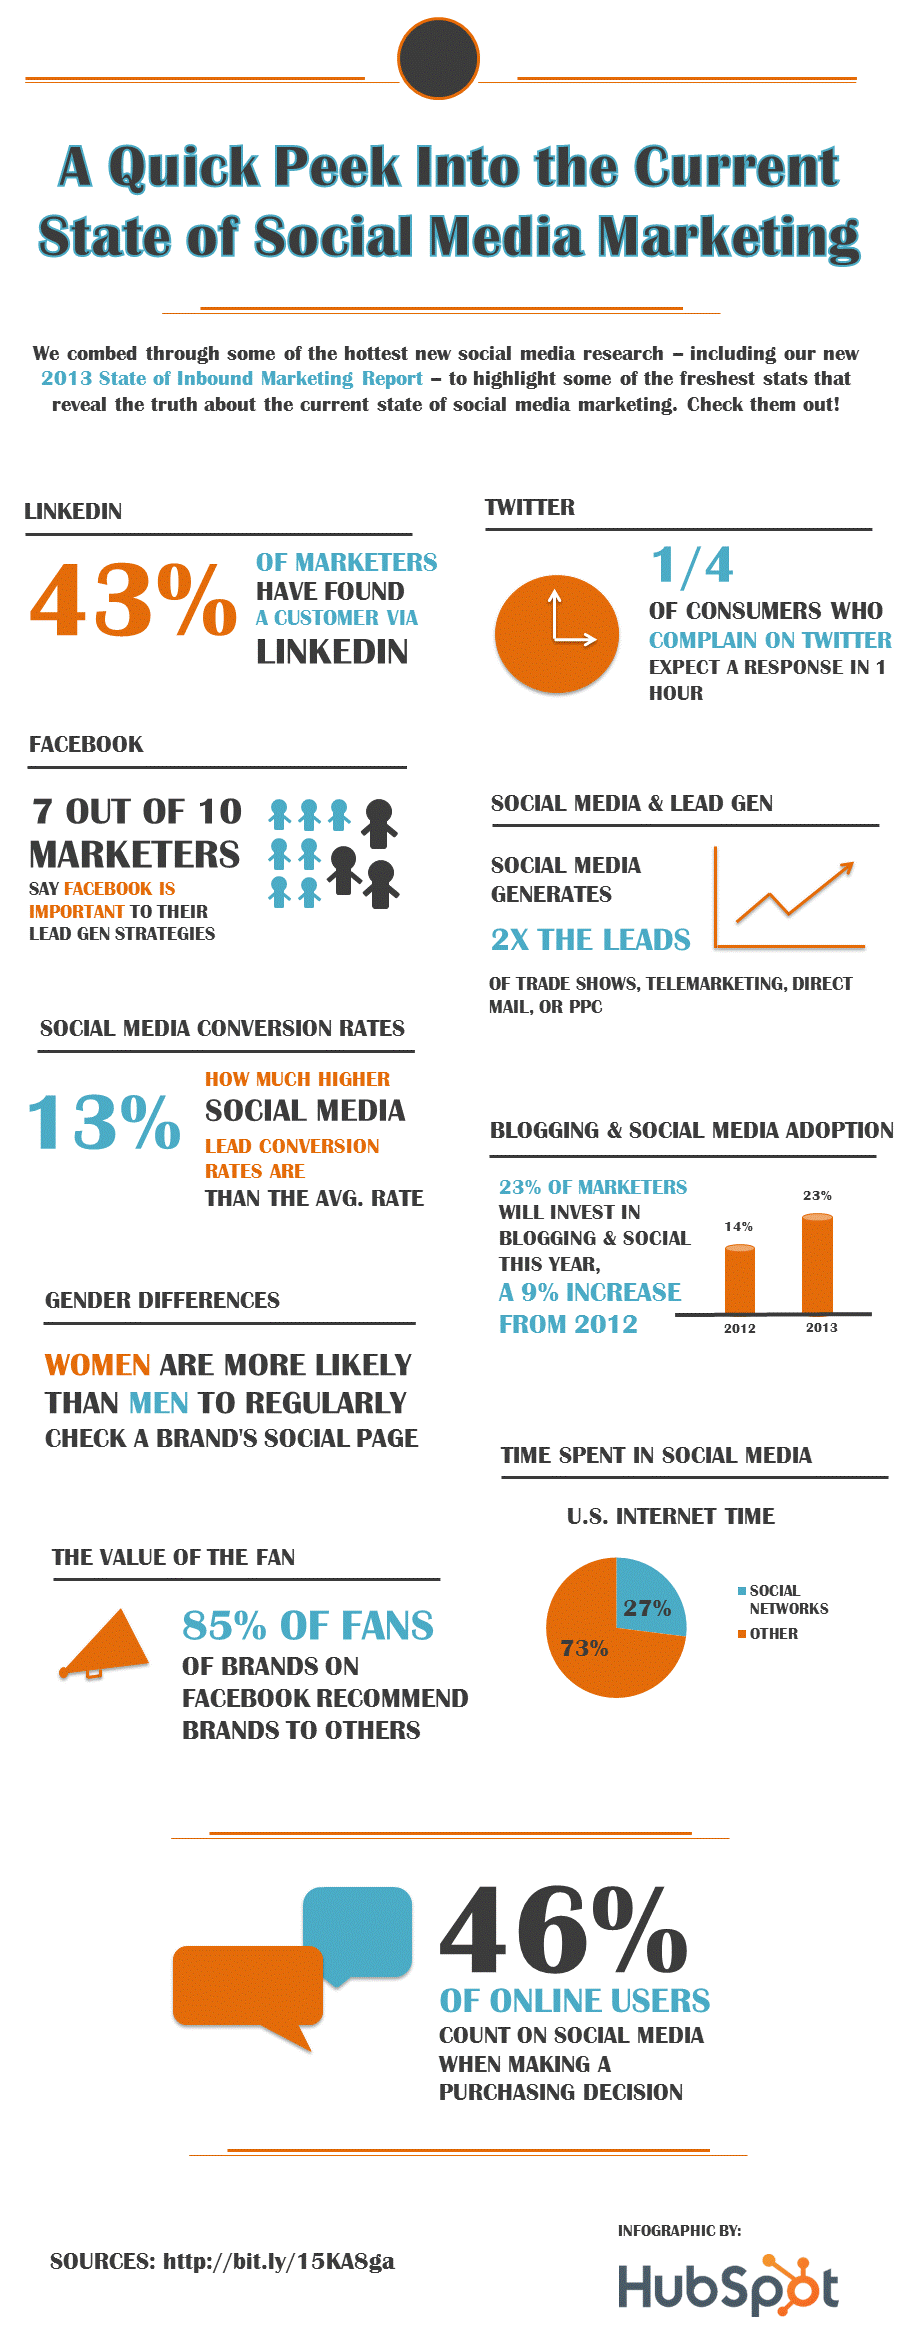 A Quick Peek Into the Current State of Social Media Marketing [INFOGRAPHIC]